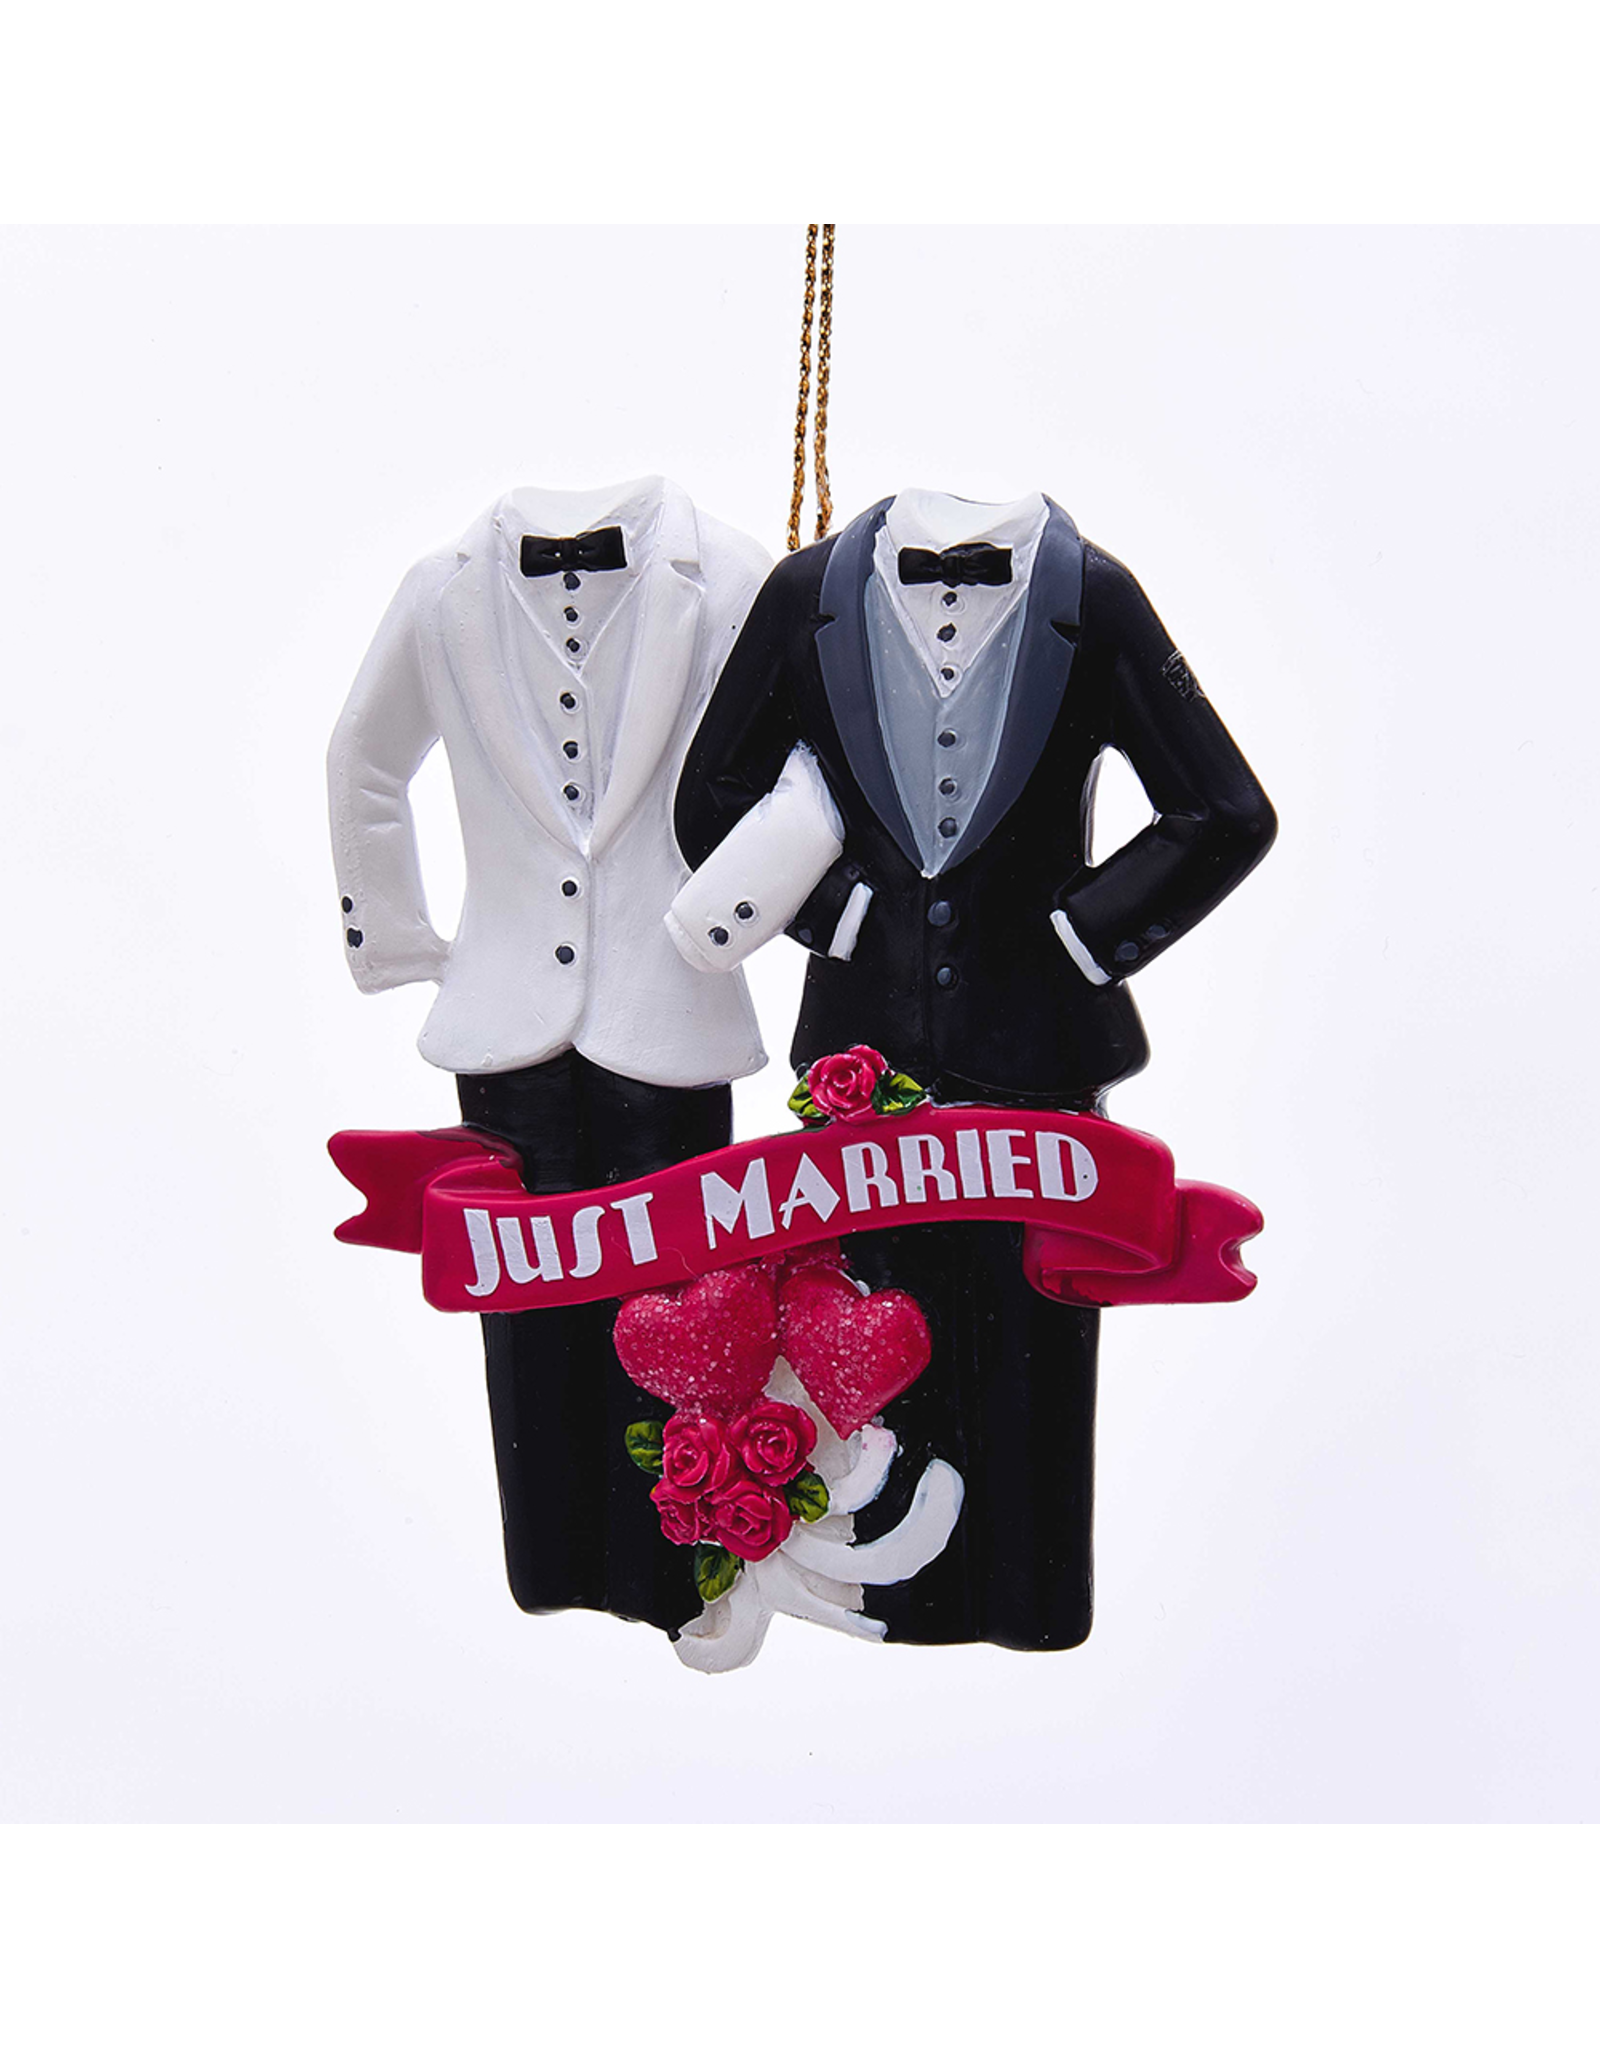 Kurt Adler Christmas Ornaments Gay-Same-Sex Marriage Just Married Couple 3.5 inch image